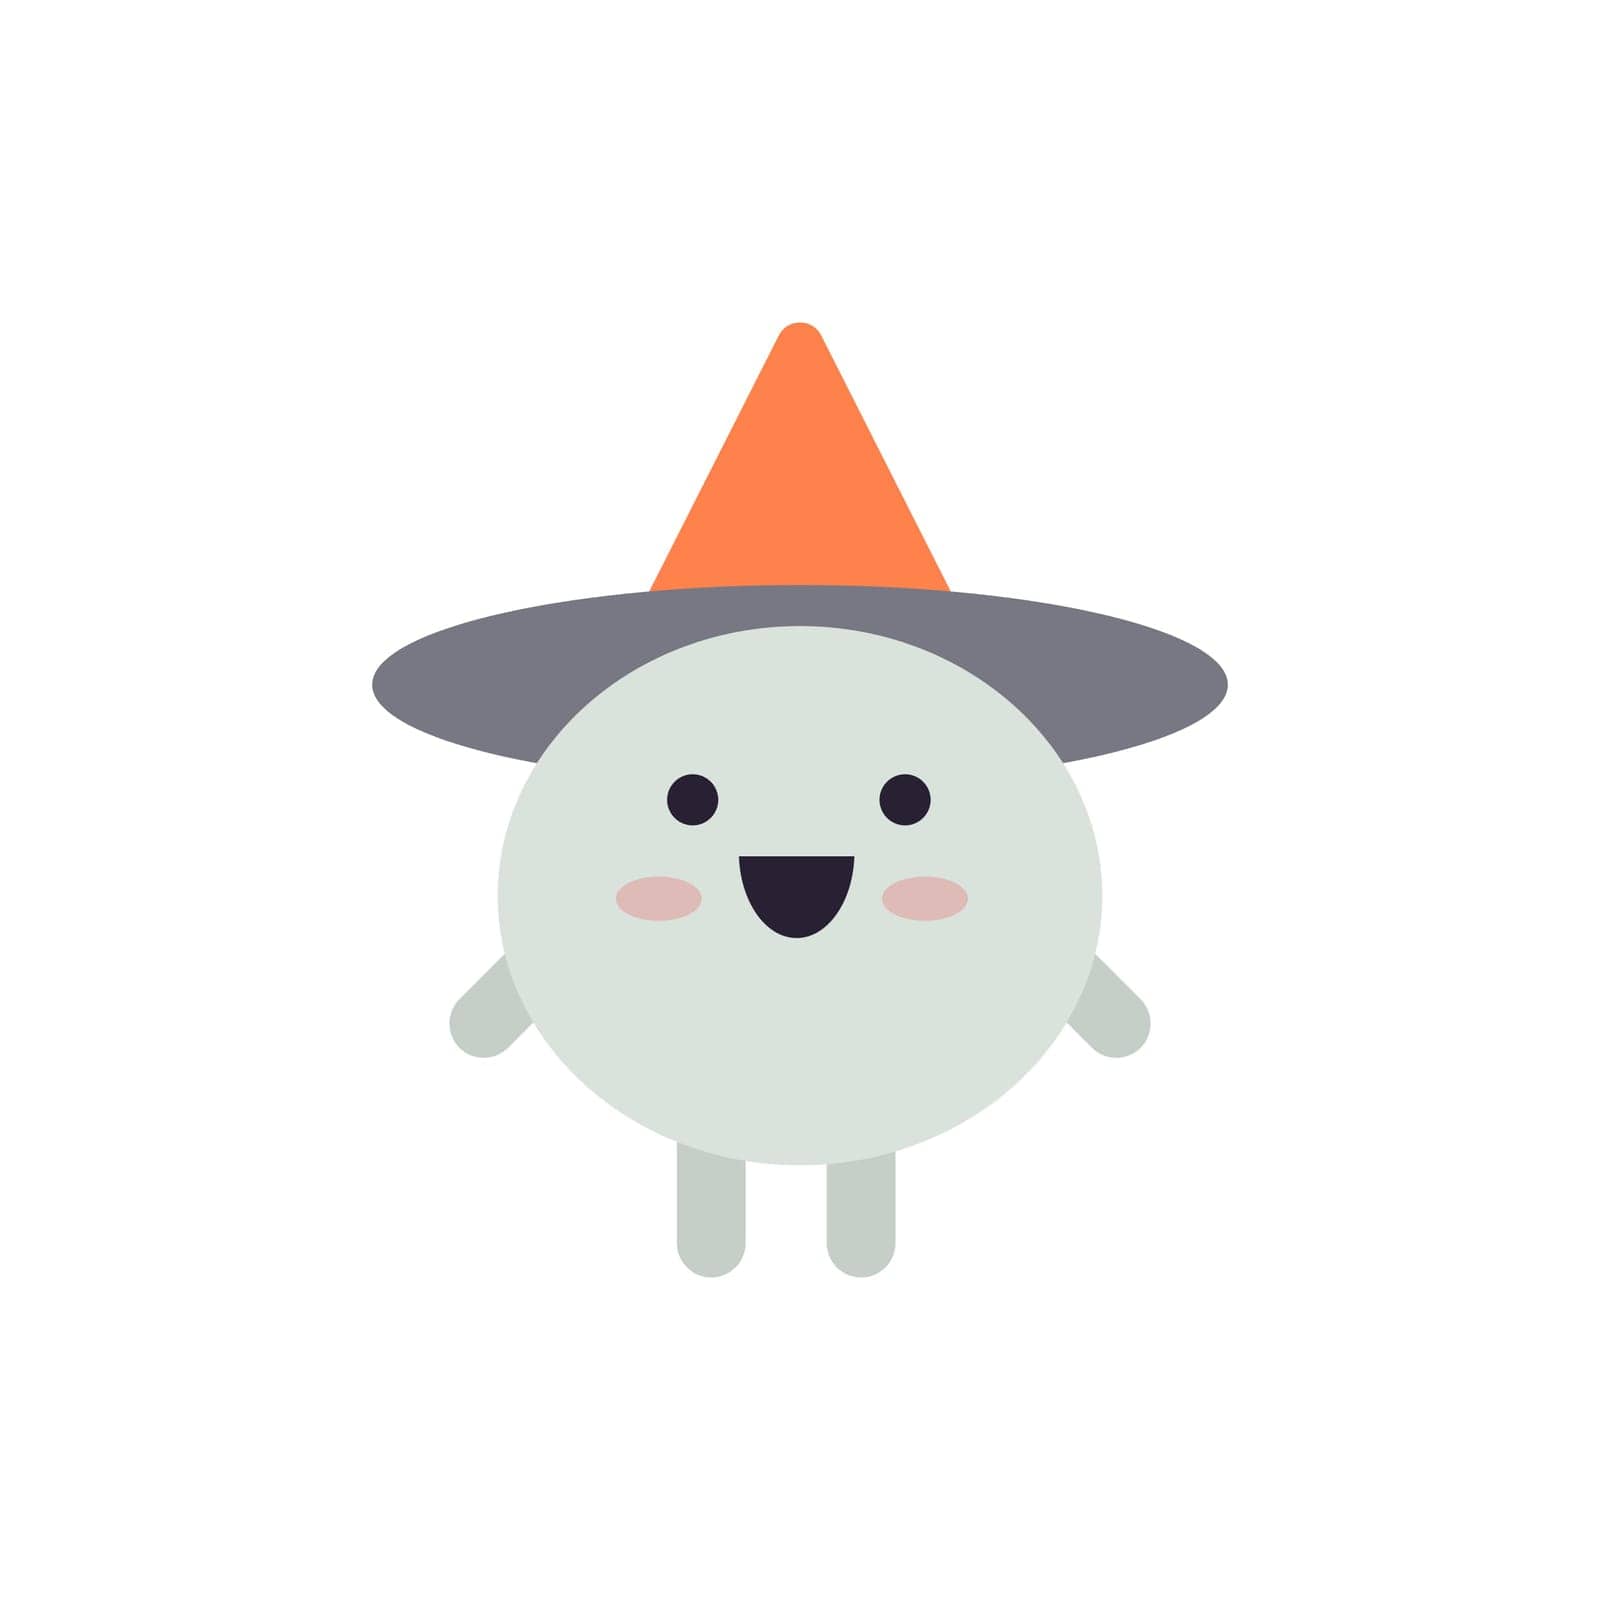 Cute funny sorcerer in hat Halloween kids cartoon character minimalist icon vector flat illustration. Happy magic wizard childish fantasy emoticon sorcery witchcraft mystic spell fairy smiling mascot